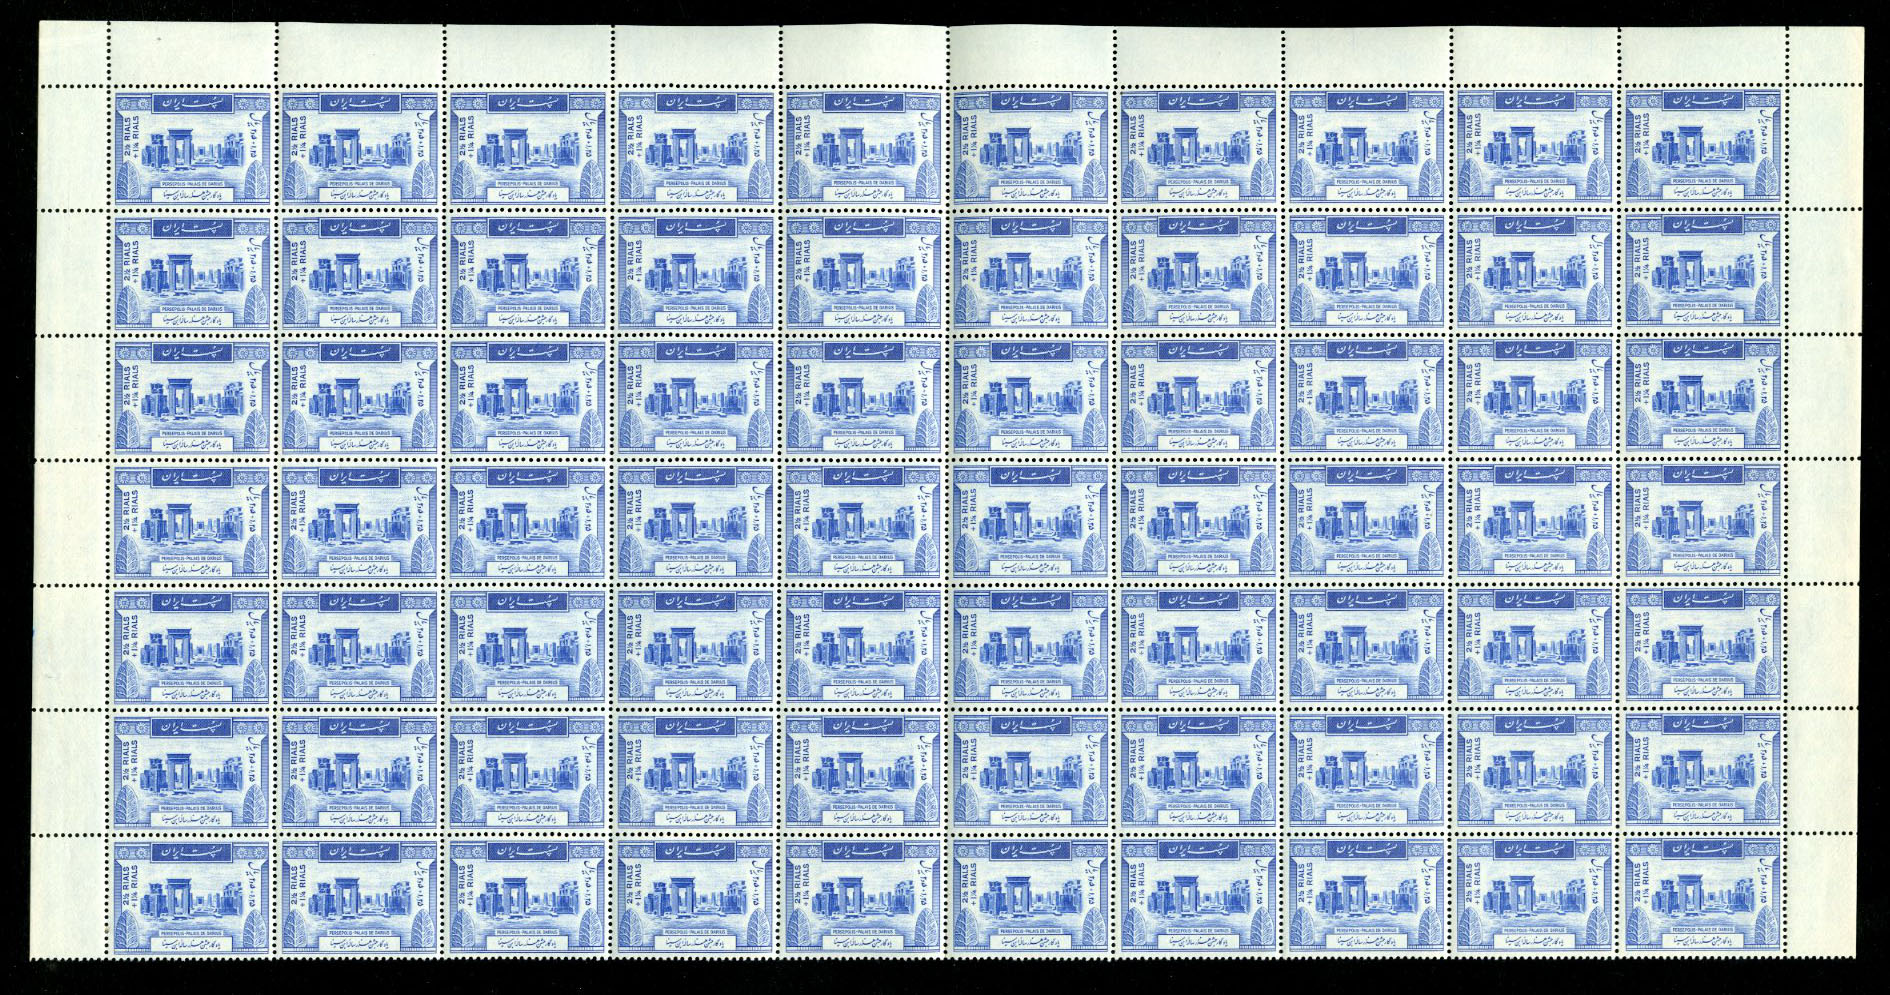 Lot 1476 - LARGE LOTS AND COLLECTIONS ROMANIA  -  Cherrystone Auctions U.S. & Worldwide Stamps & Postal History